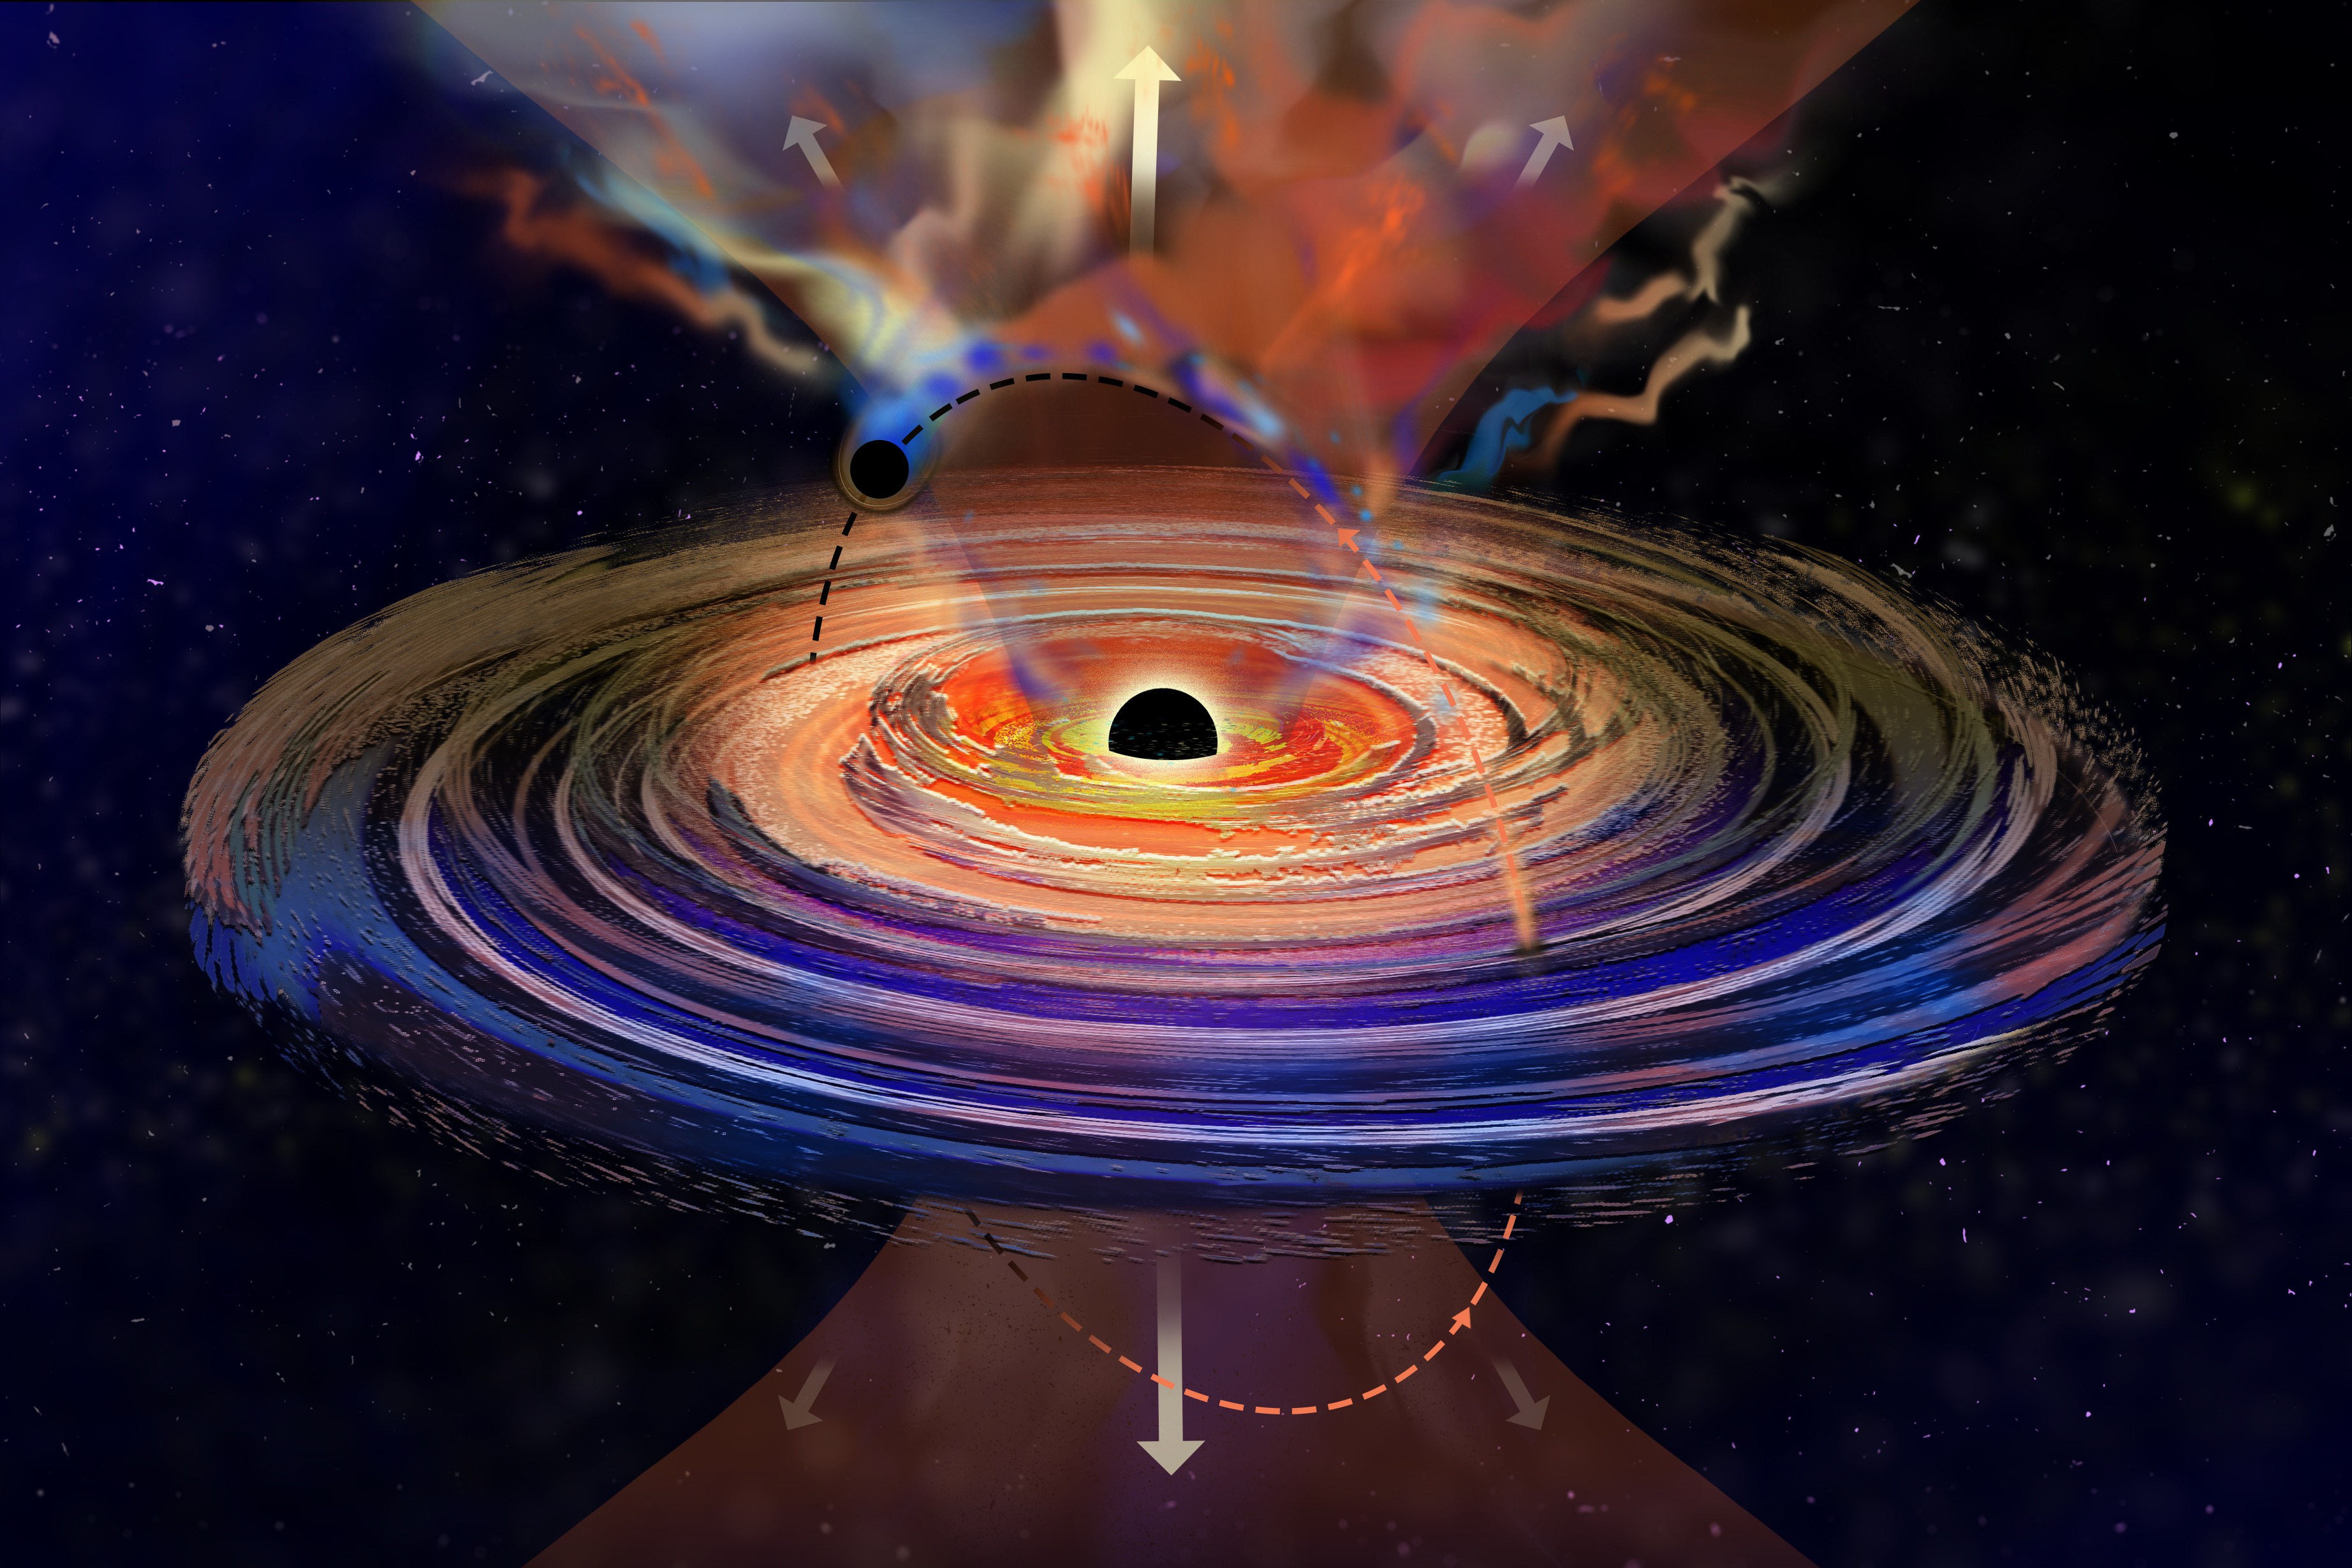 Scientists have found a large black hole that “hiccups,” giving off plumes of gas. Analysis revealed a tiny black hole was repeatedly punching through the larger black hole’s disk of gas, causing the plumes to release. Powerful magnetic fields, to the north and south of the black hole and represented by the orange cone, slingshot the plume up and out of the disk. Each time the smaller black hole punches through the disk, it would eject another plume, in a regular, periodic pattern. Credit: Jose-Luis Olivares, MIT